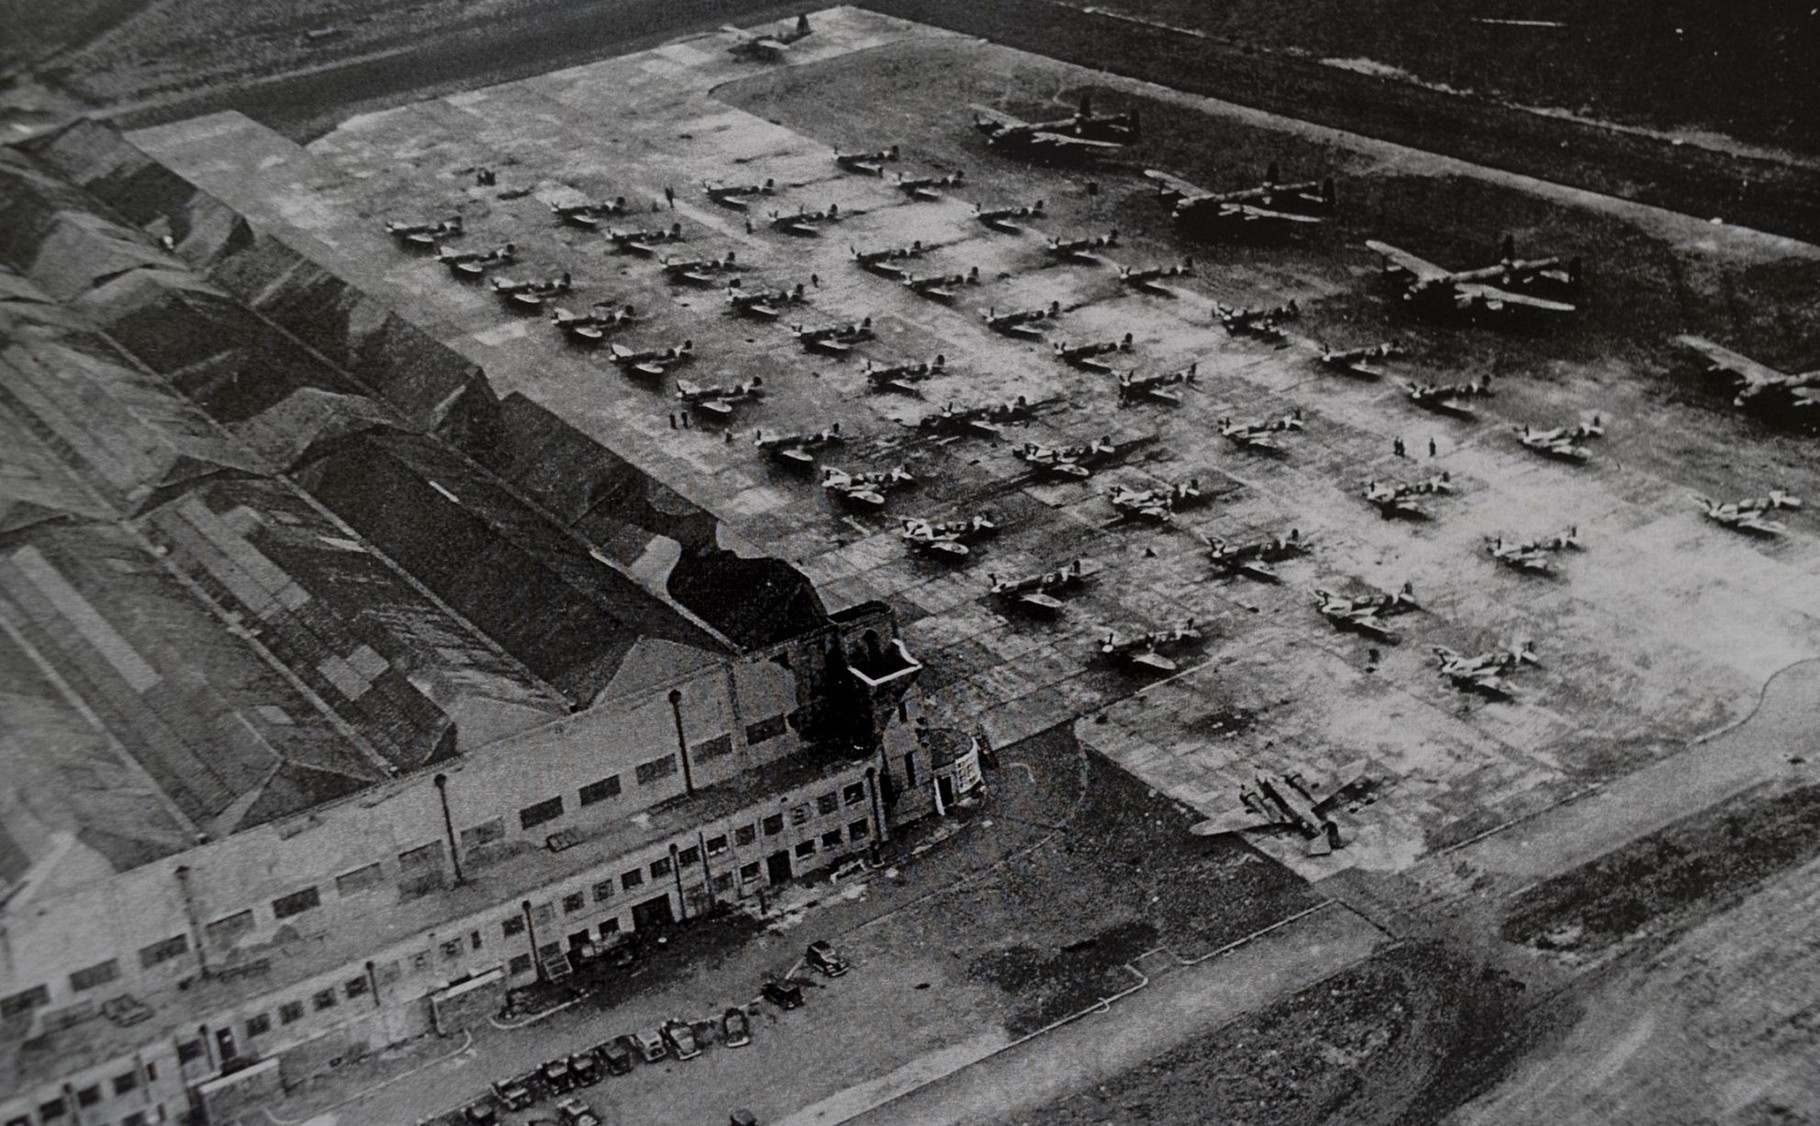 The Spitfire factory (now the Jaguar) during World War 2. Image from the Birmingham Post.